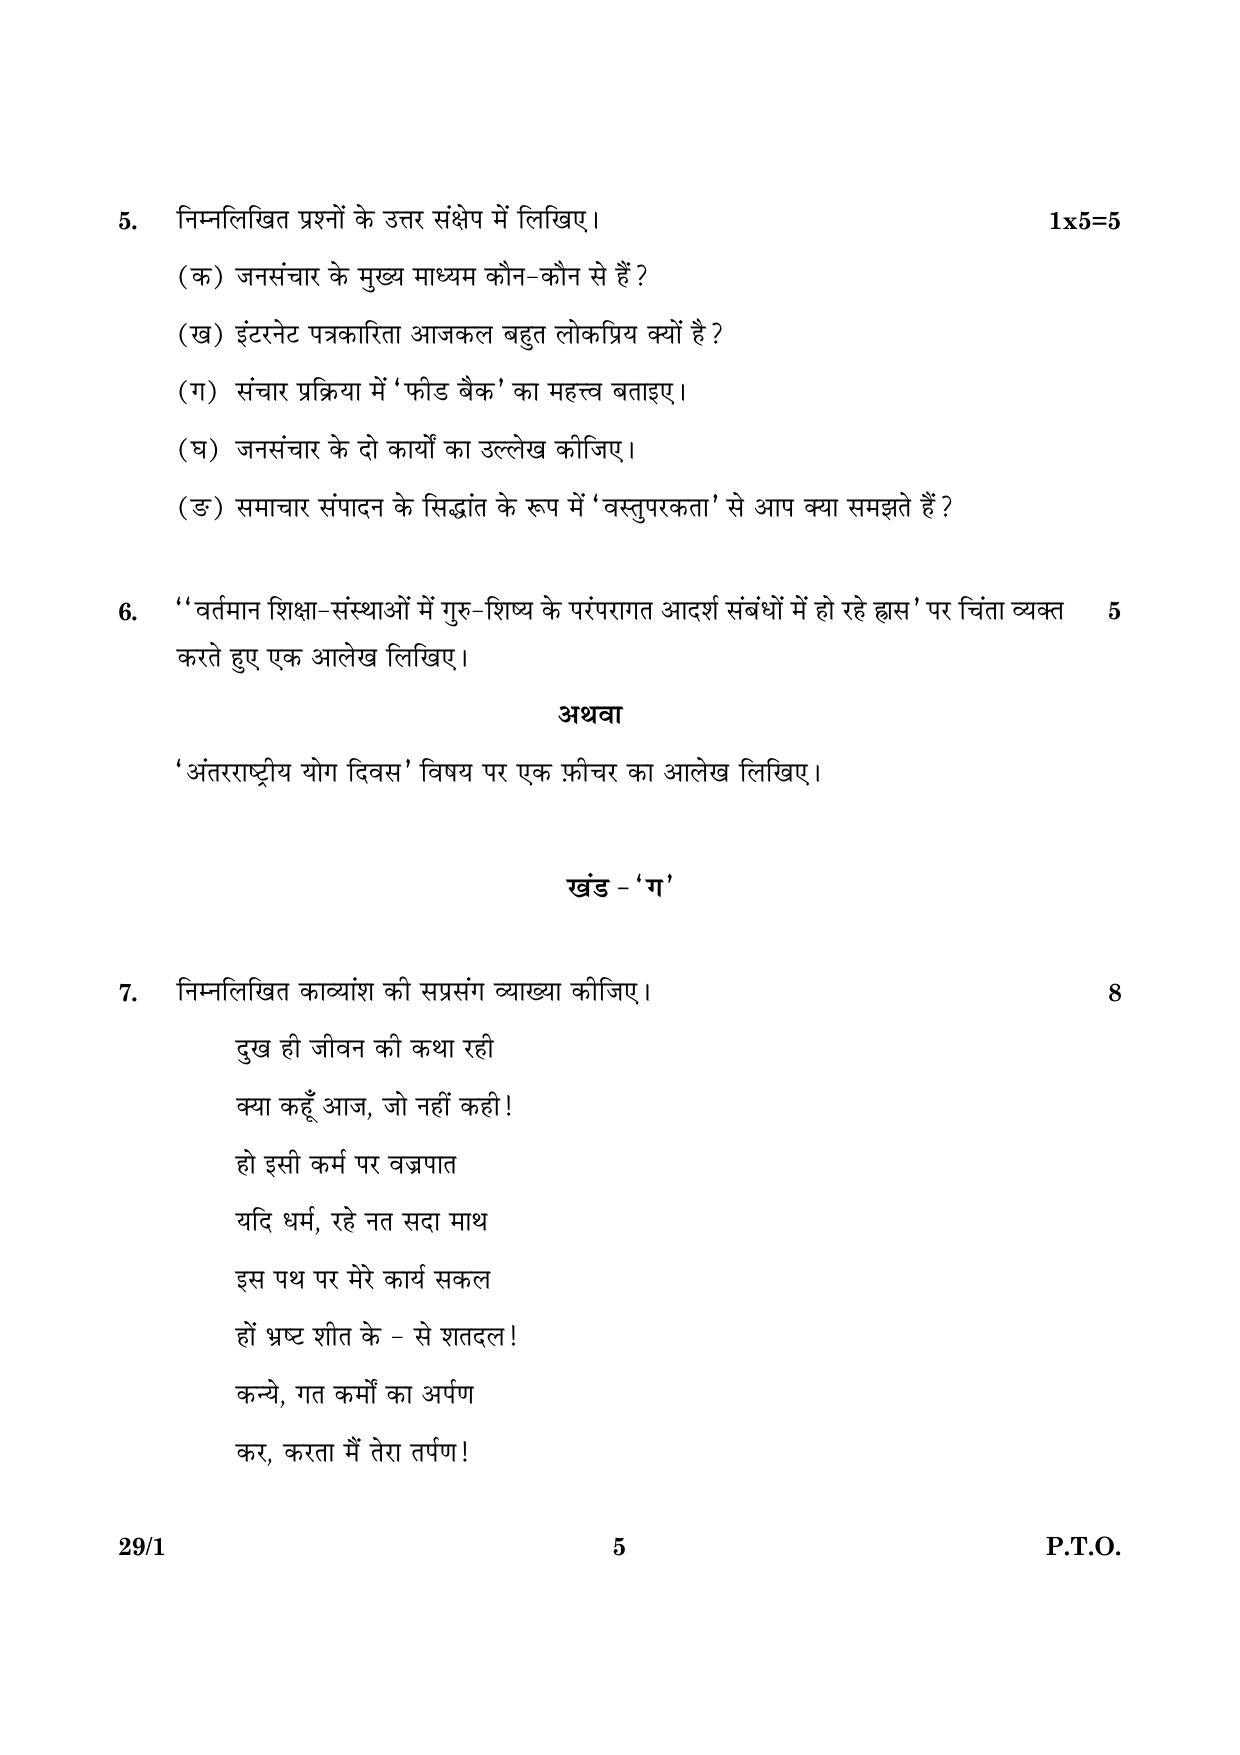 CBSE Class 12 029 Set 1 Hindi Elective 2016 Question Paper - Page 5